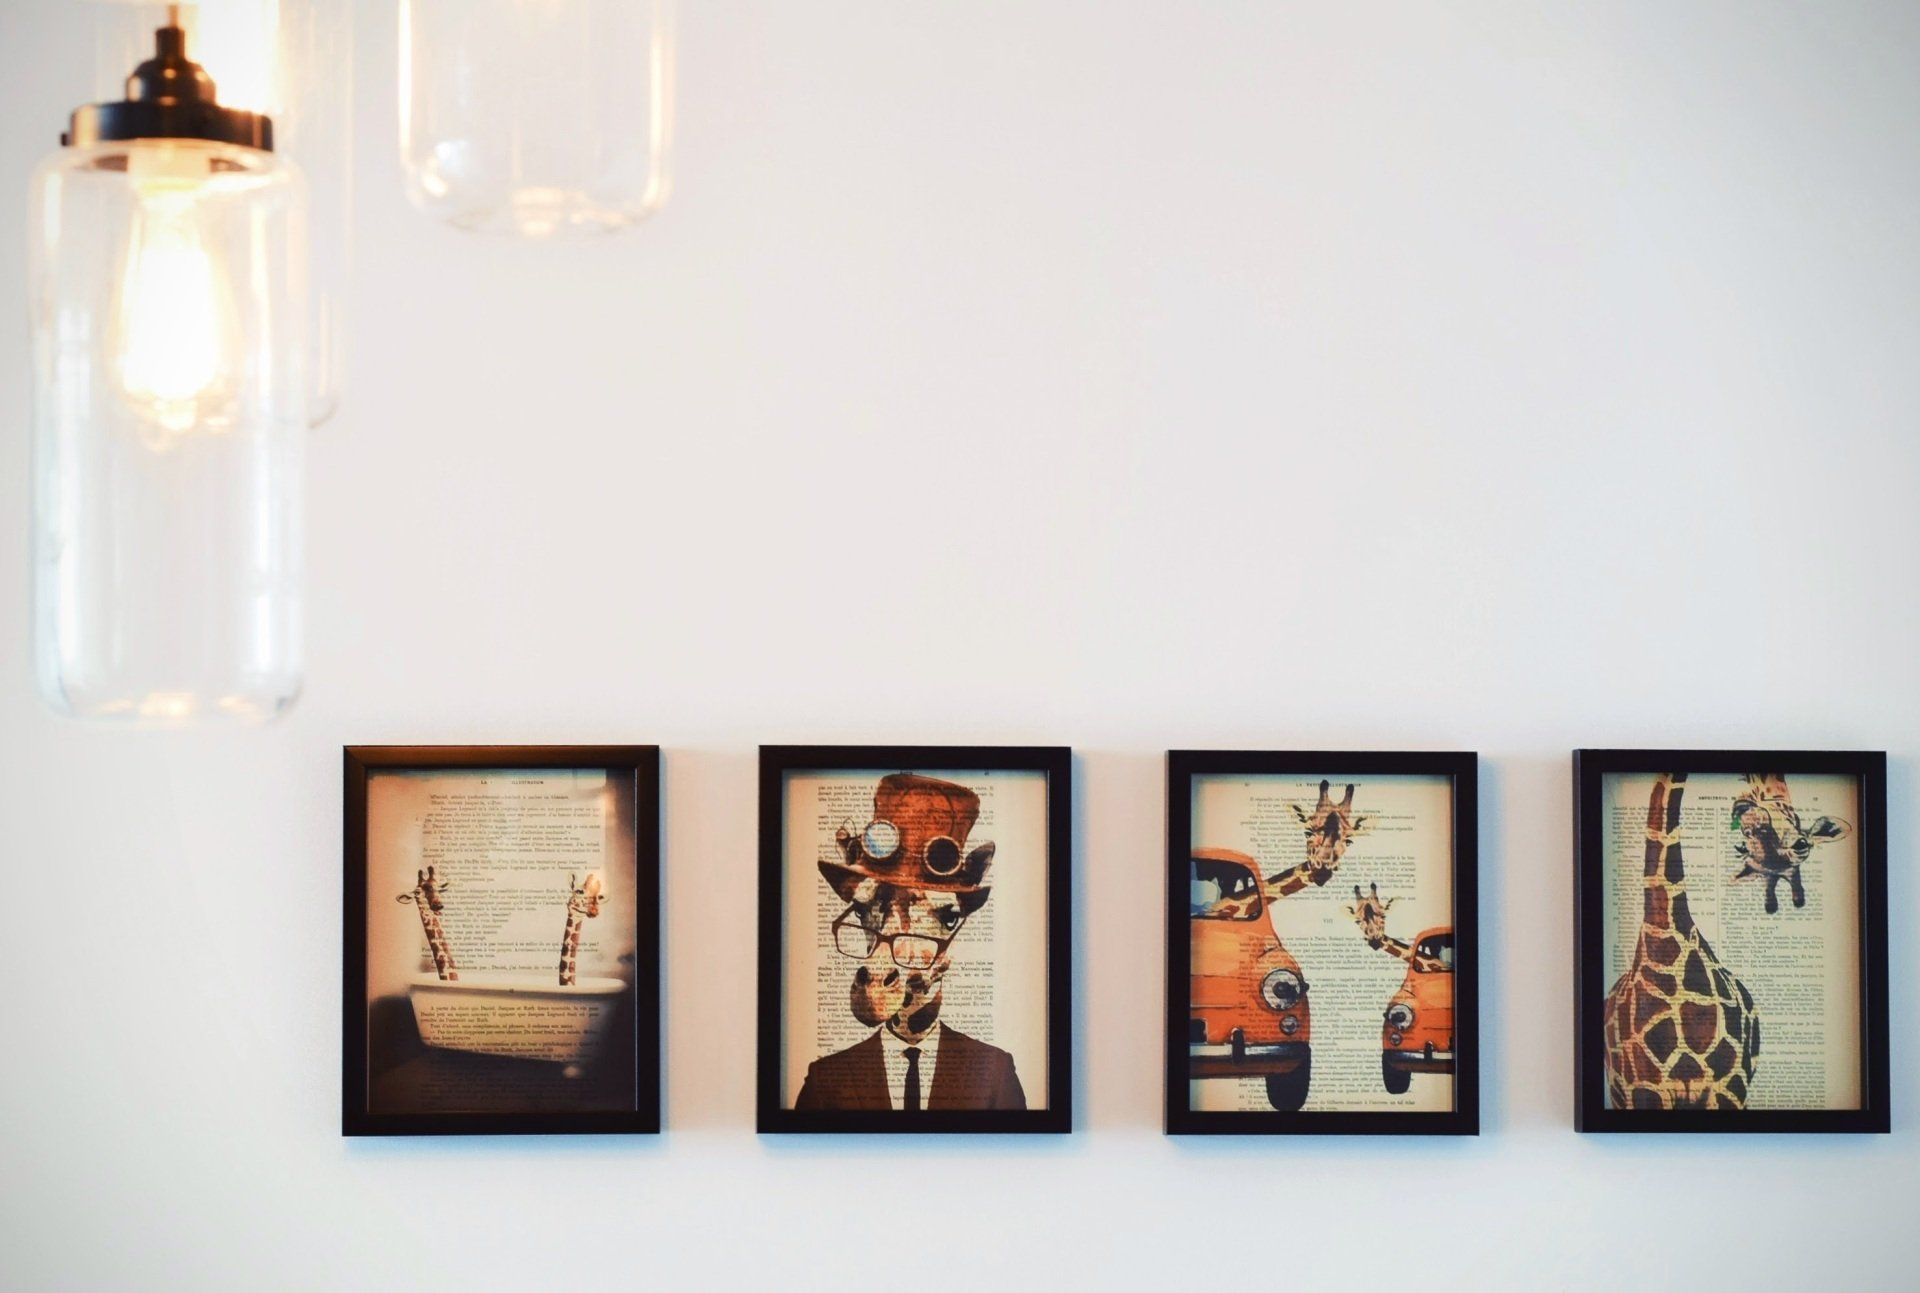 A row of four framed pictures on a white wall.